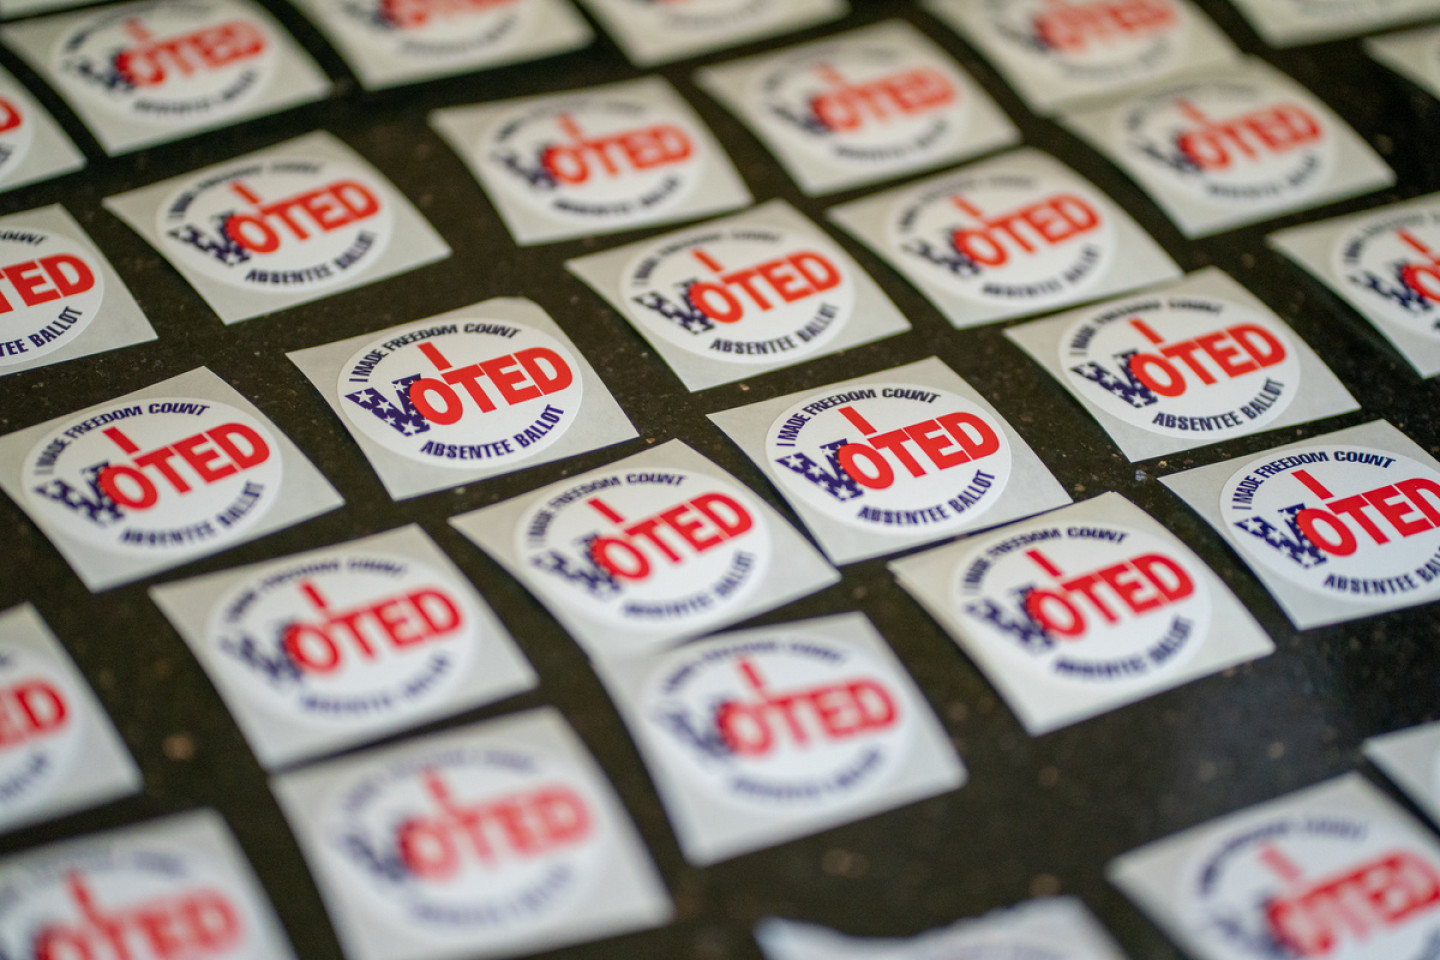 Photo of rows of I Voted stickers